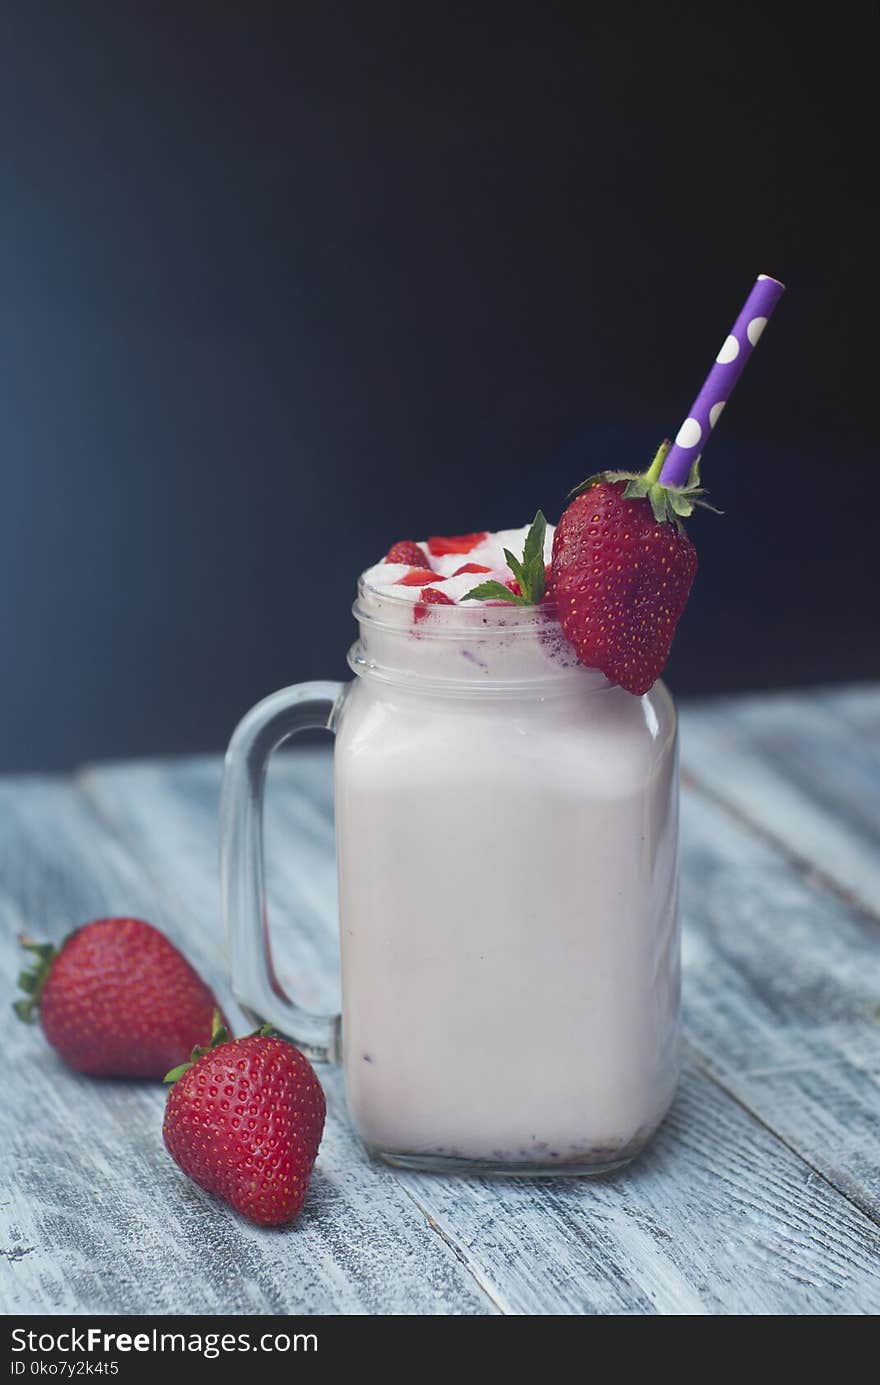 Milk Cocktail Shake Drink with Srawberry. homemade Fruit Milkshake with Straw in Glass. Rustic Gray wooden Background.